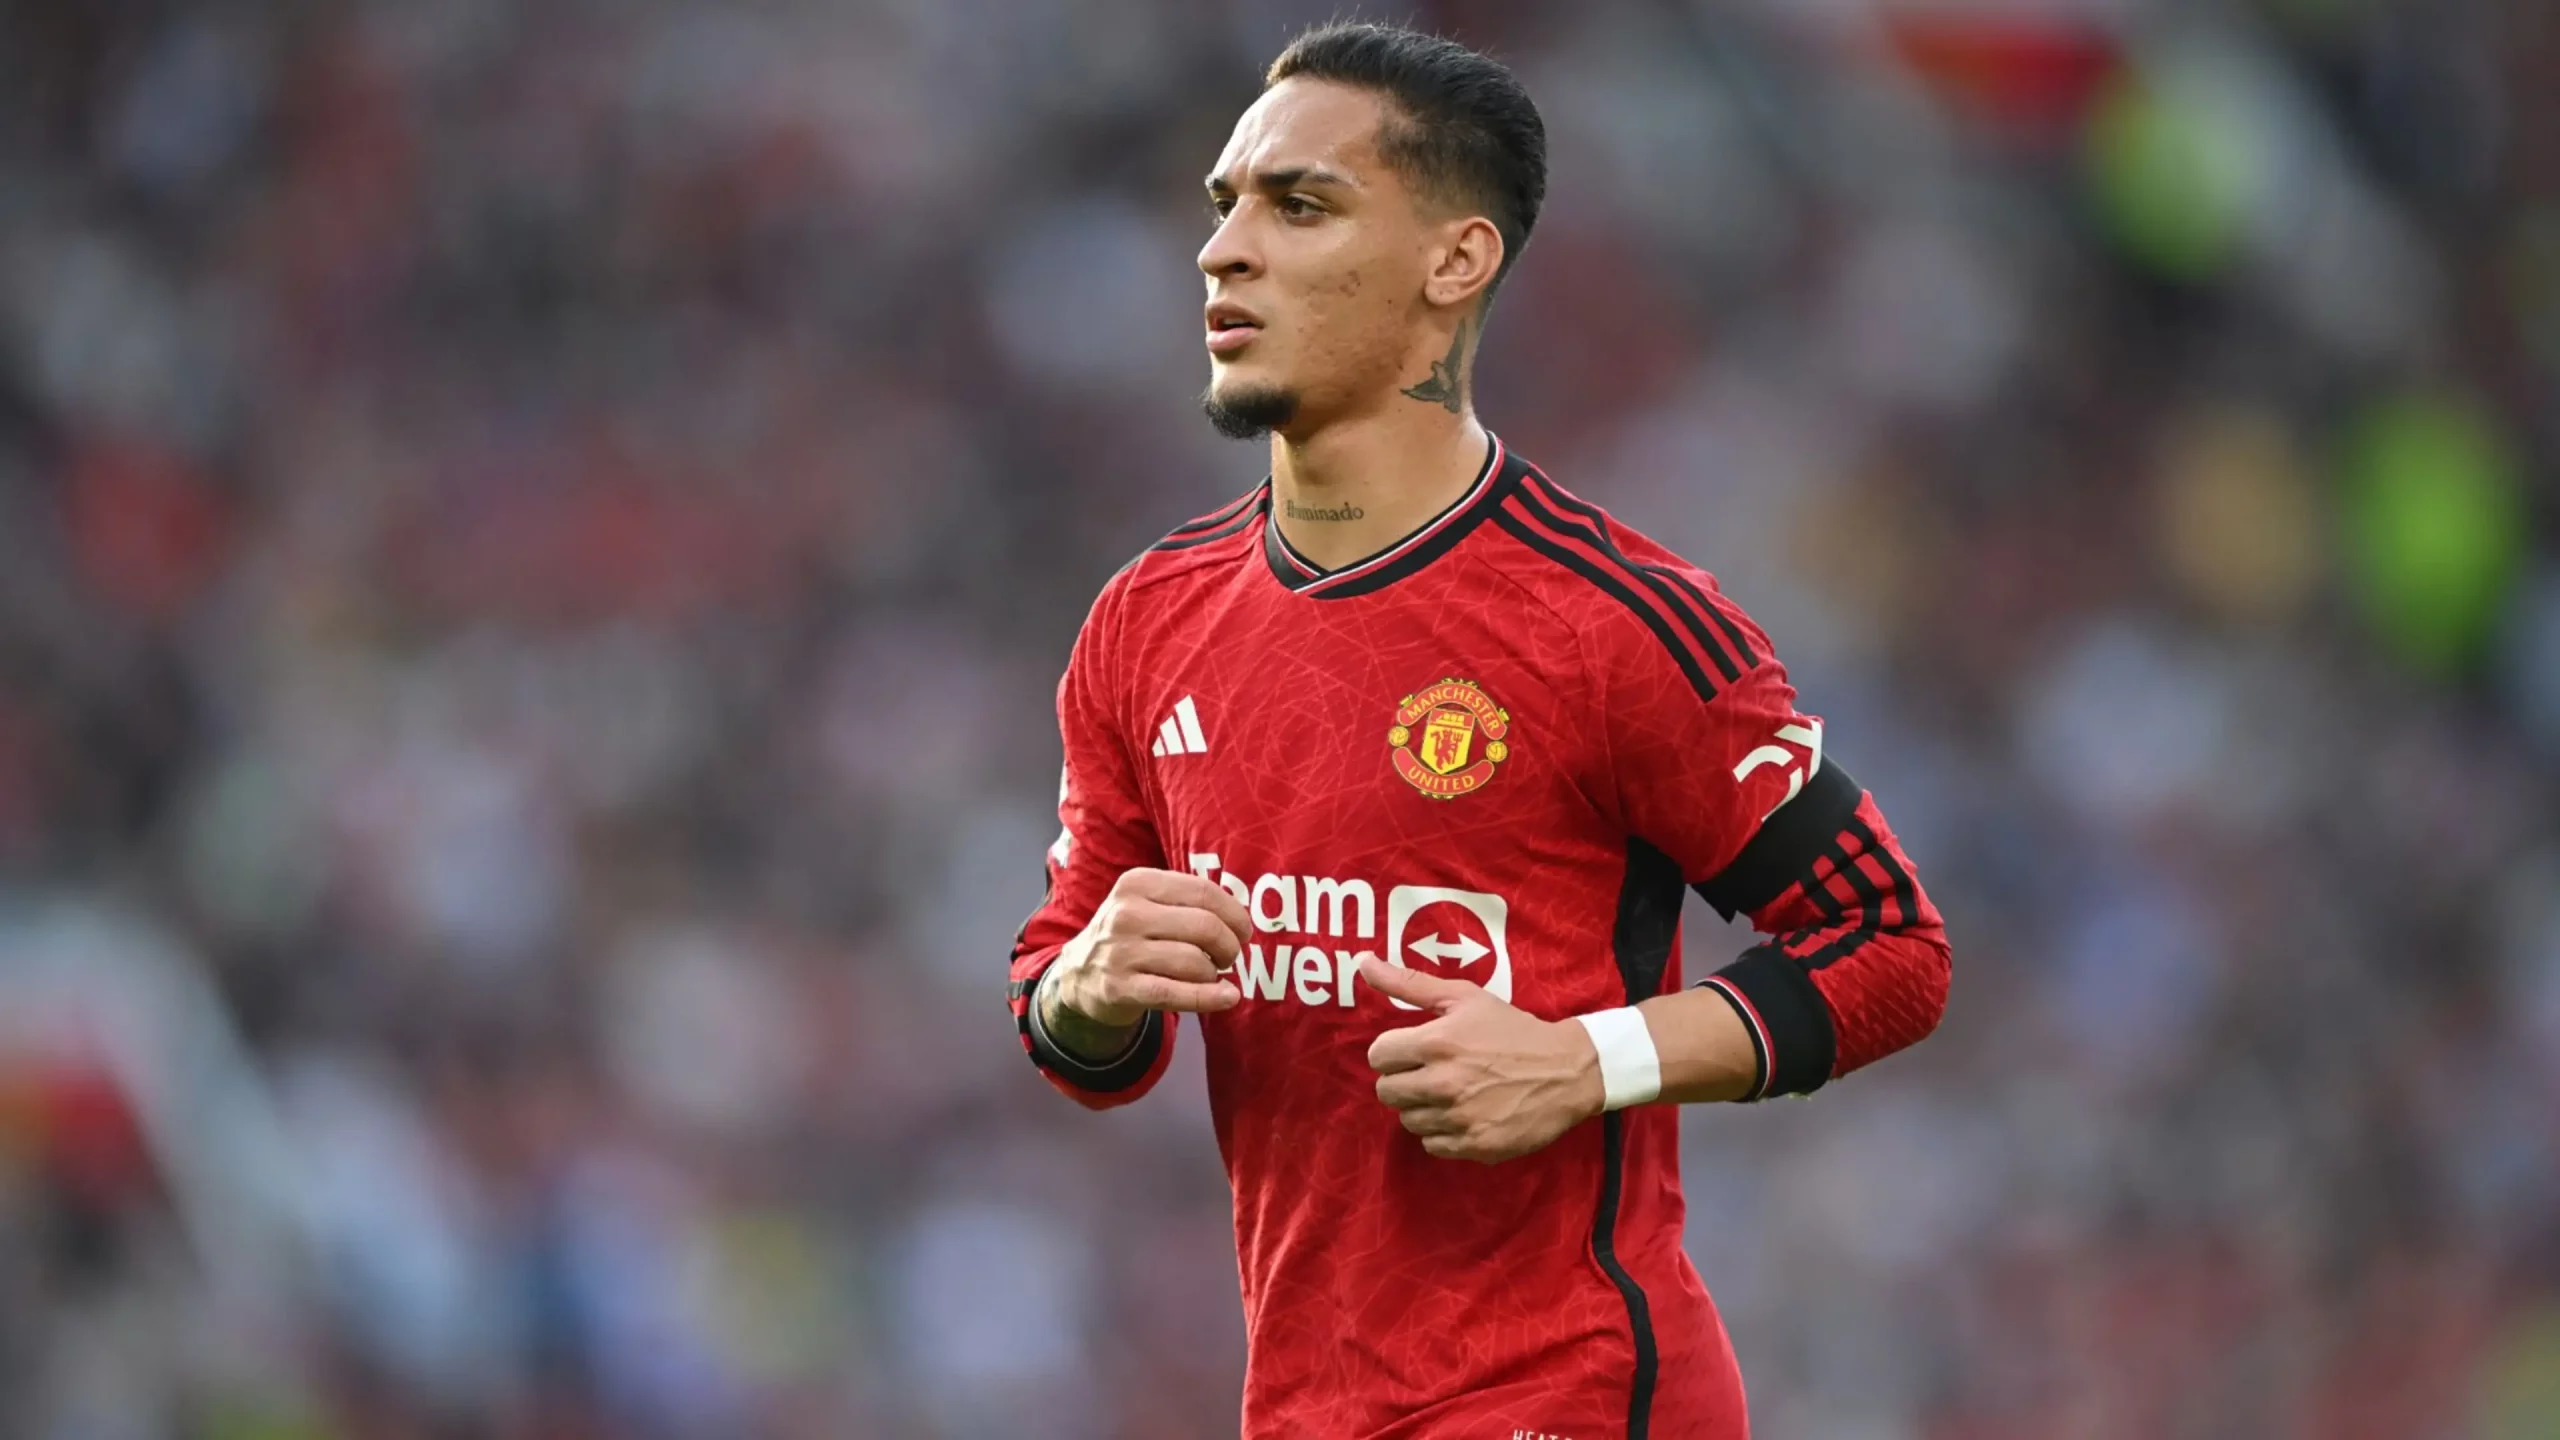 After joining the team from Ajax in 2022, the 23-year-old had a comparatively successful first season at Old Trafford, making 44 appearances while scoring eight goals and dishing out three assists.